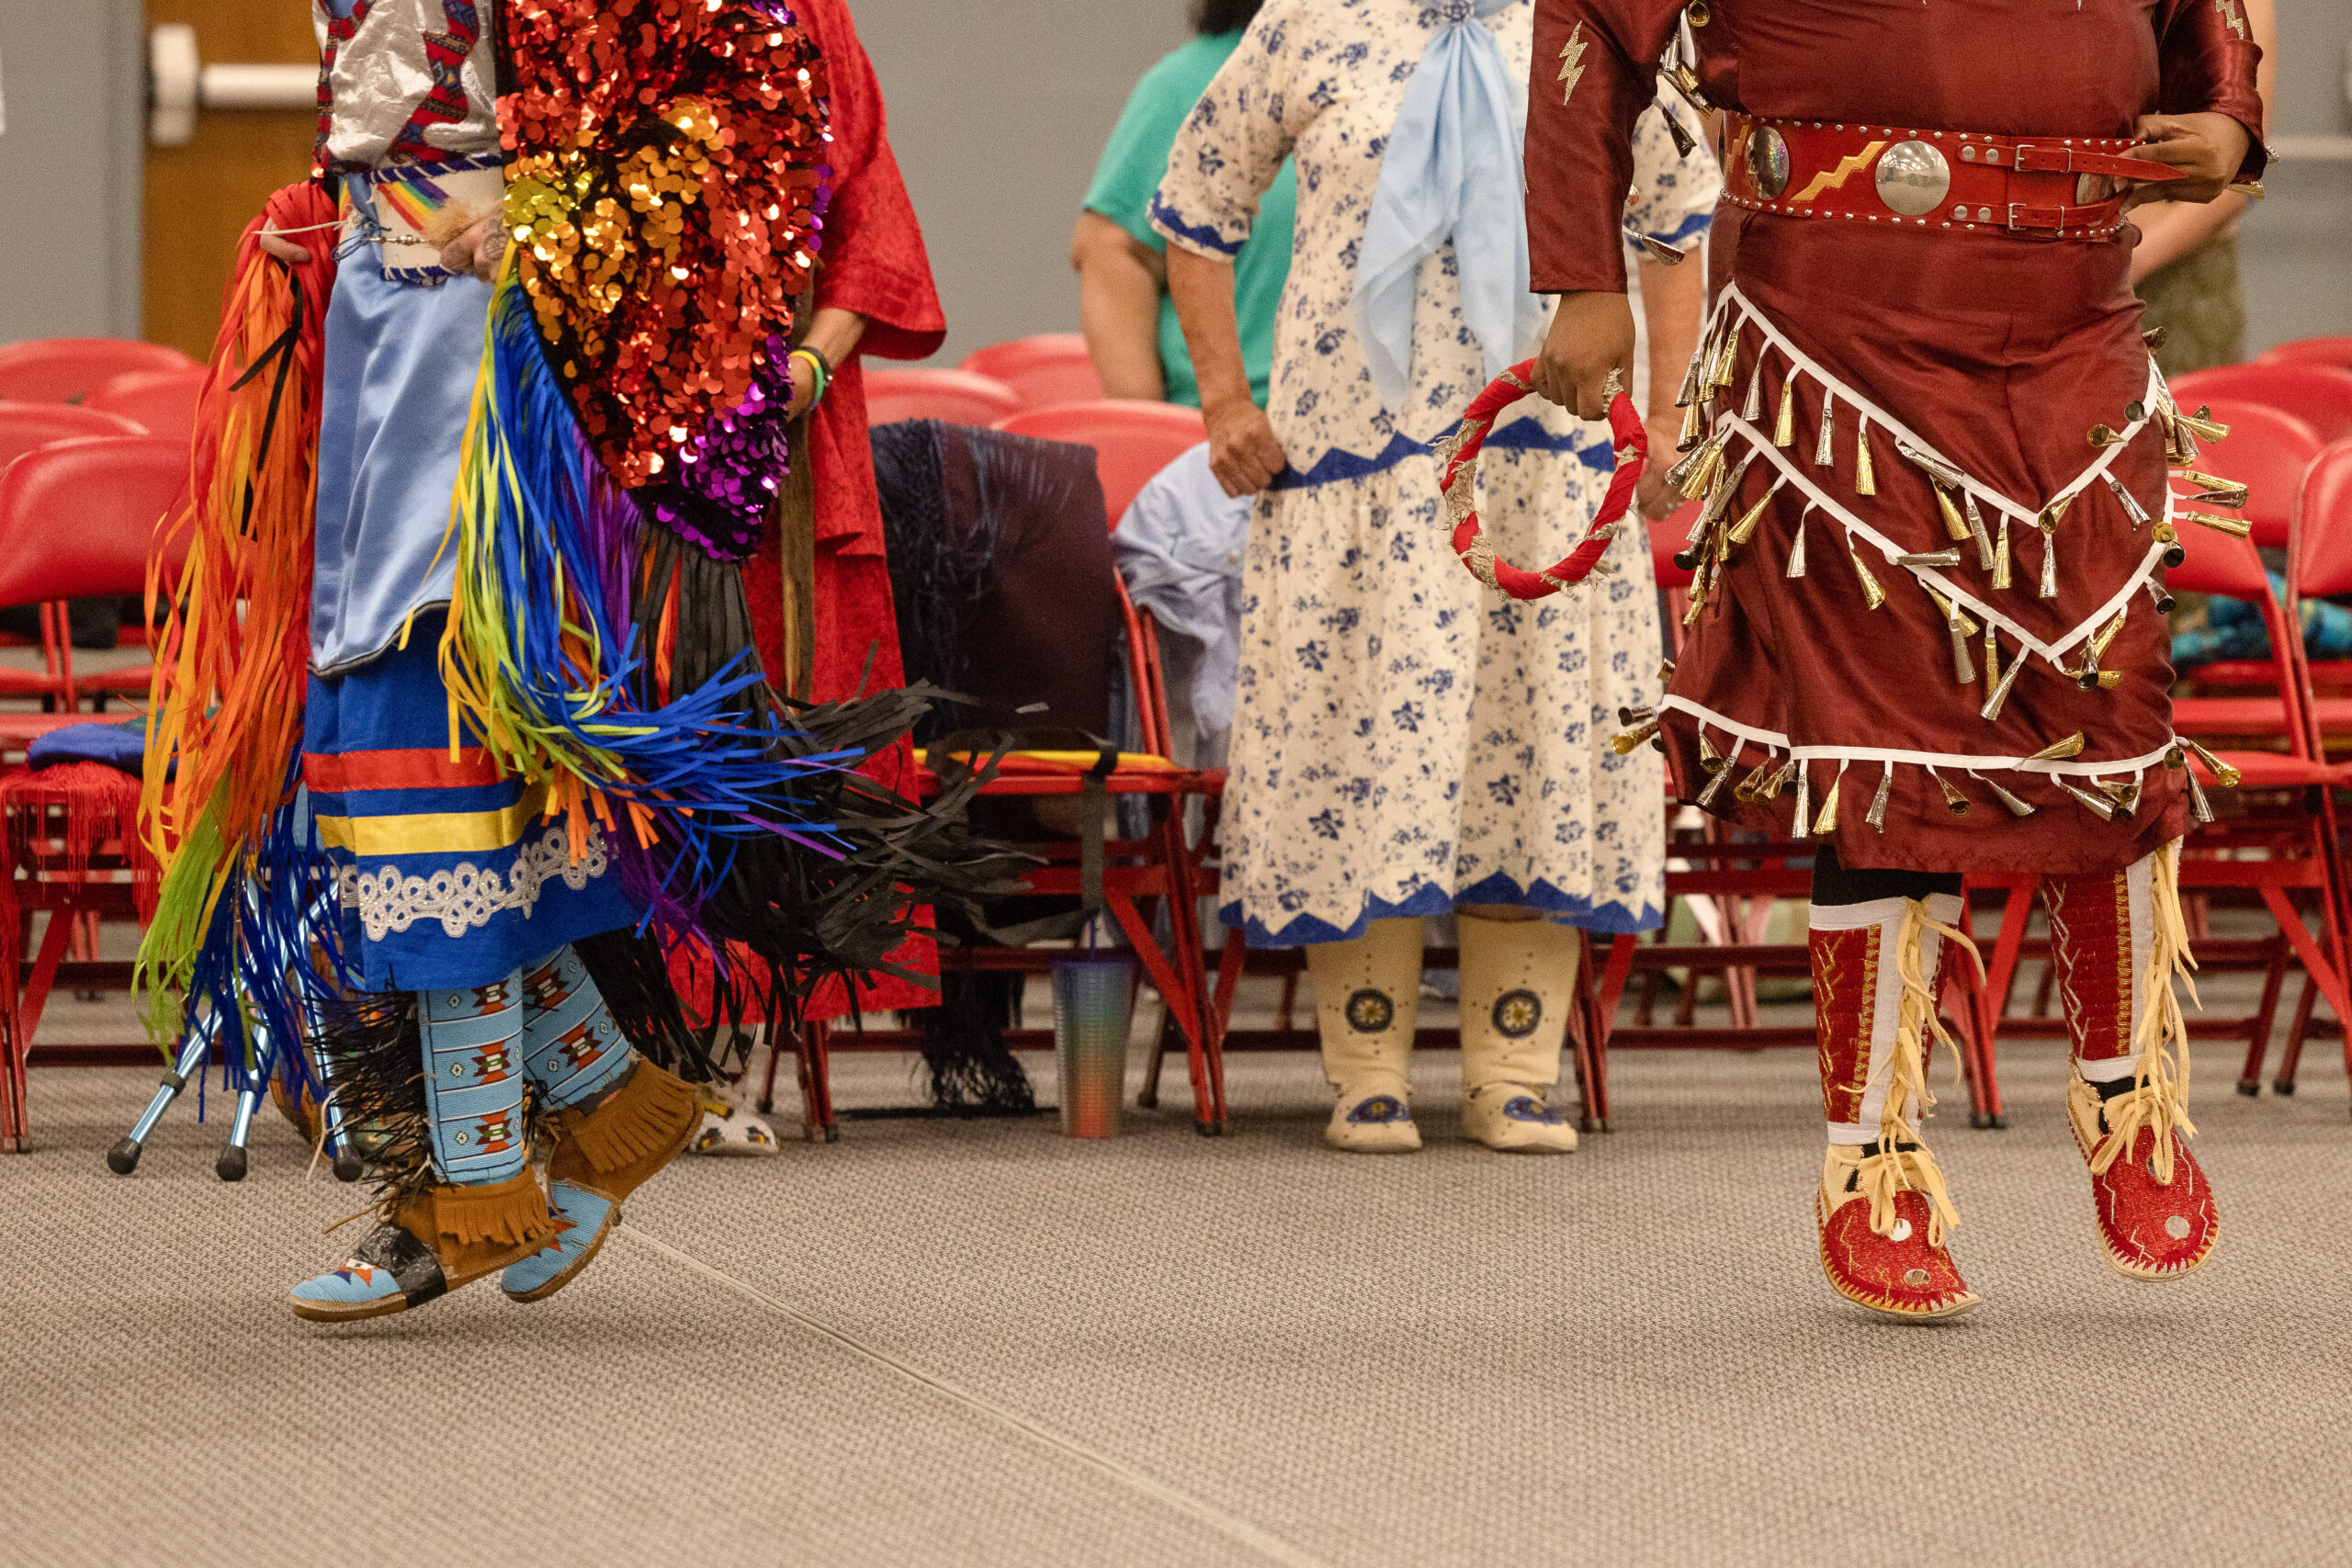 A ground-level shot of three people in colorful regalia dancing; their faces are not visible.